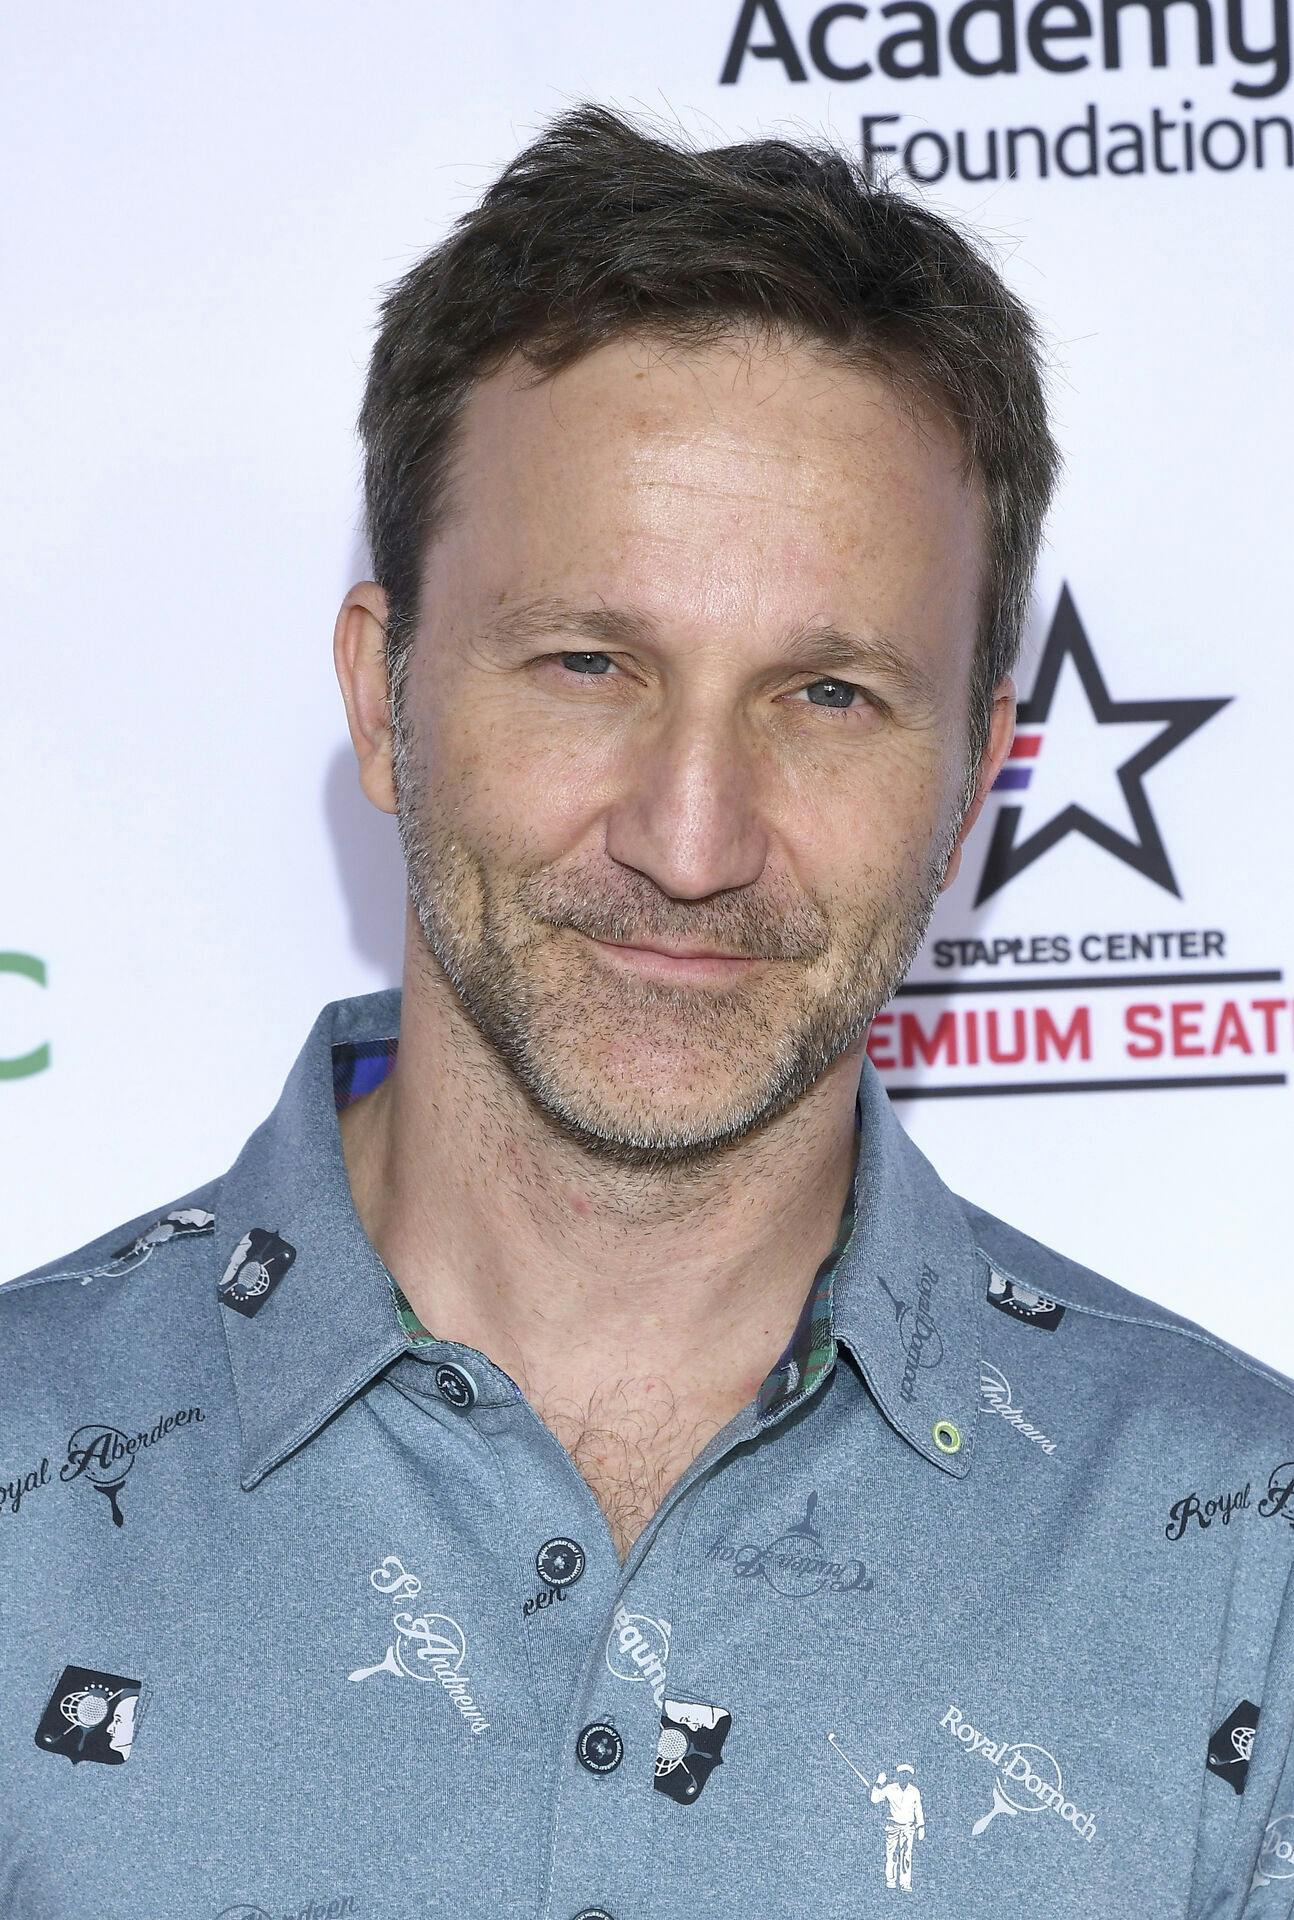 Breckin Meyer attends the 19th Annual Emmys Golf Classic at the Wilshire Country Club on Monday, Oct. 29, 2018 in Los Angeles. (Photo by Vince Bucci/Invision for the Television Academy/AP Images)